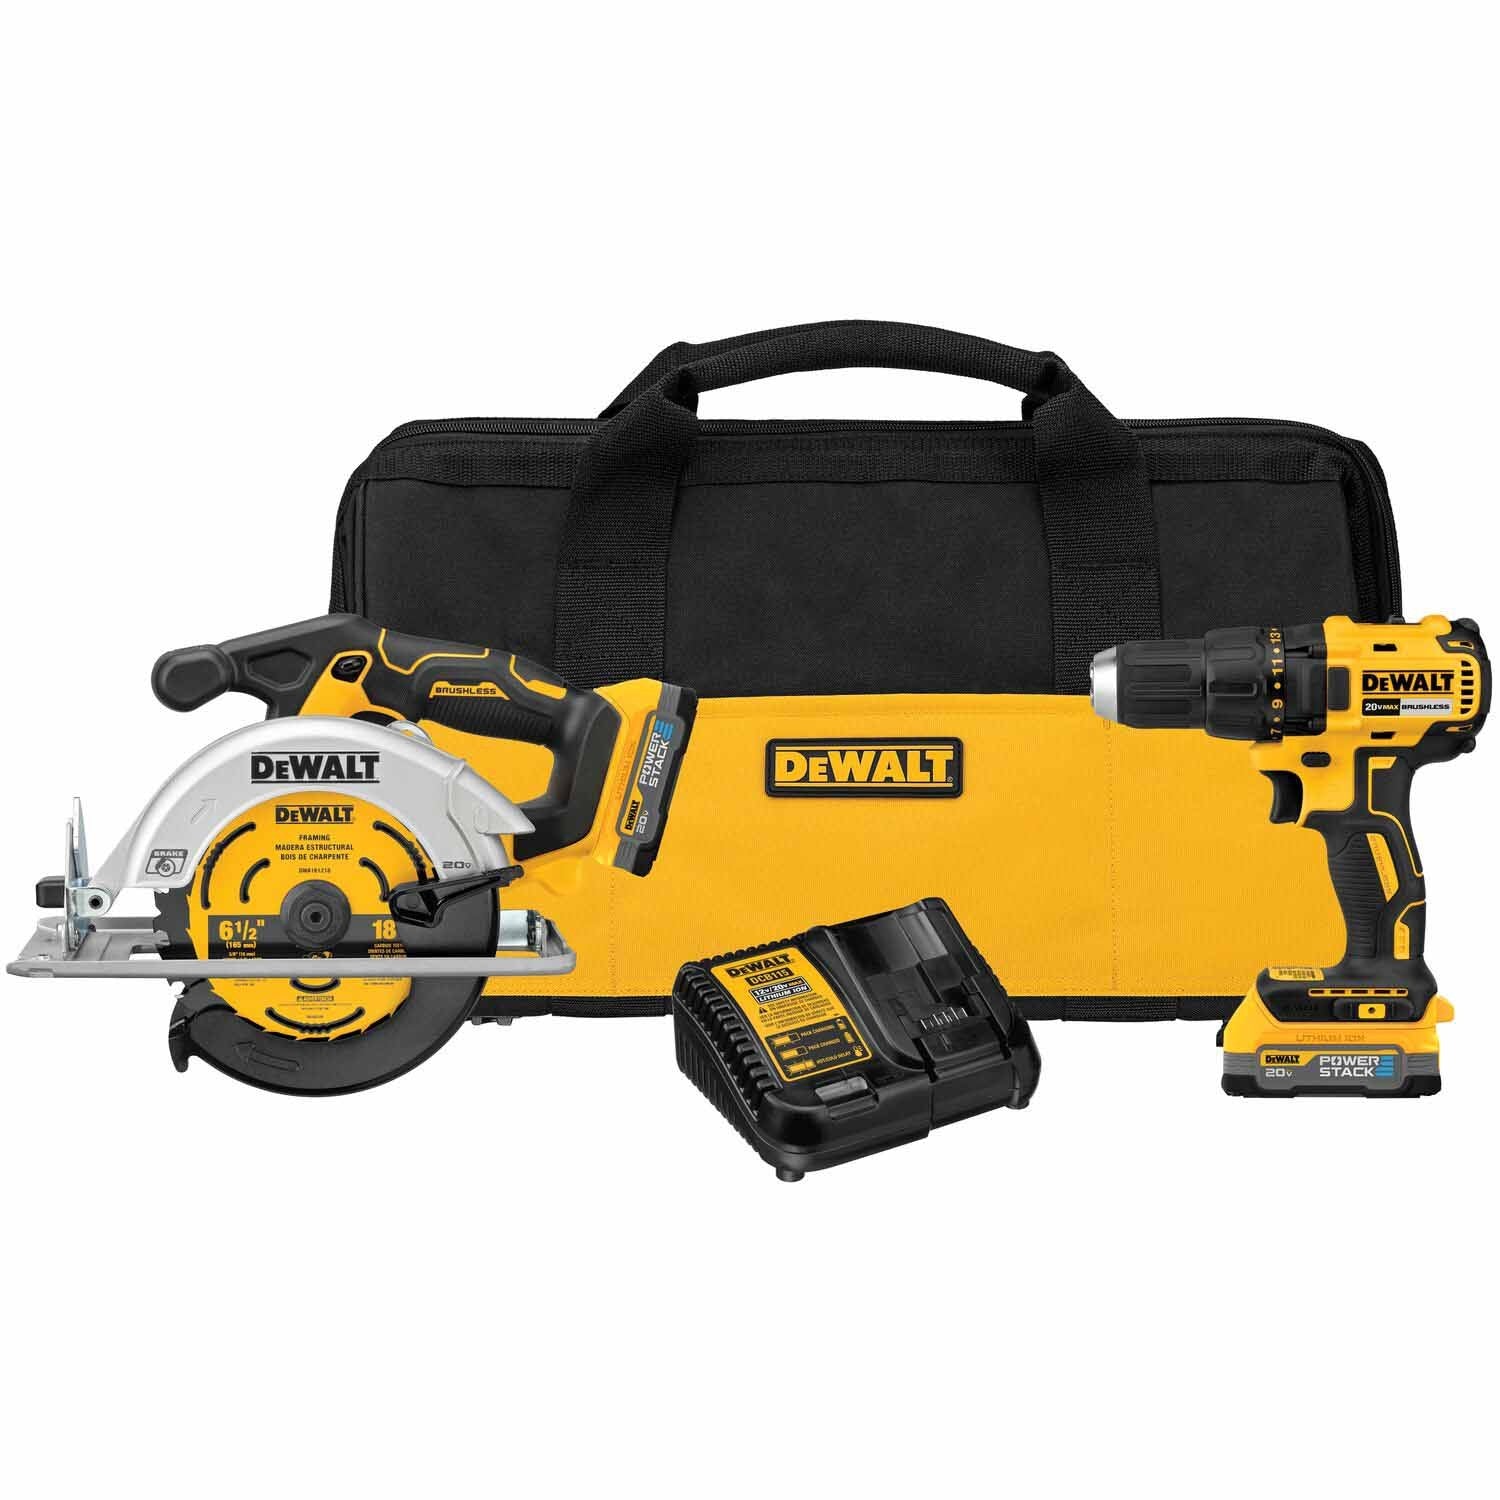 Save up to 50% on DeWalt power tools, batteries, and kits during